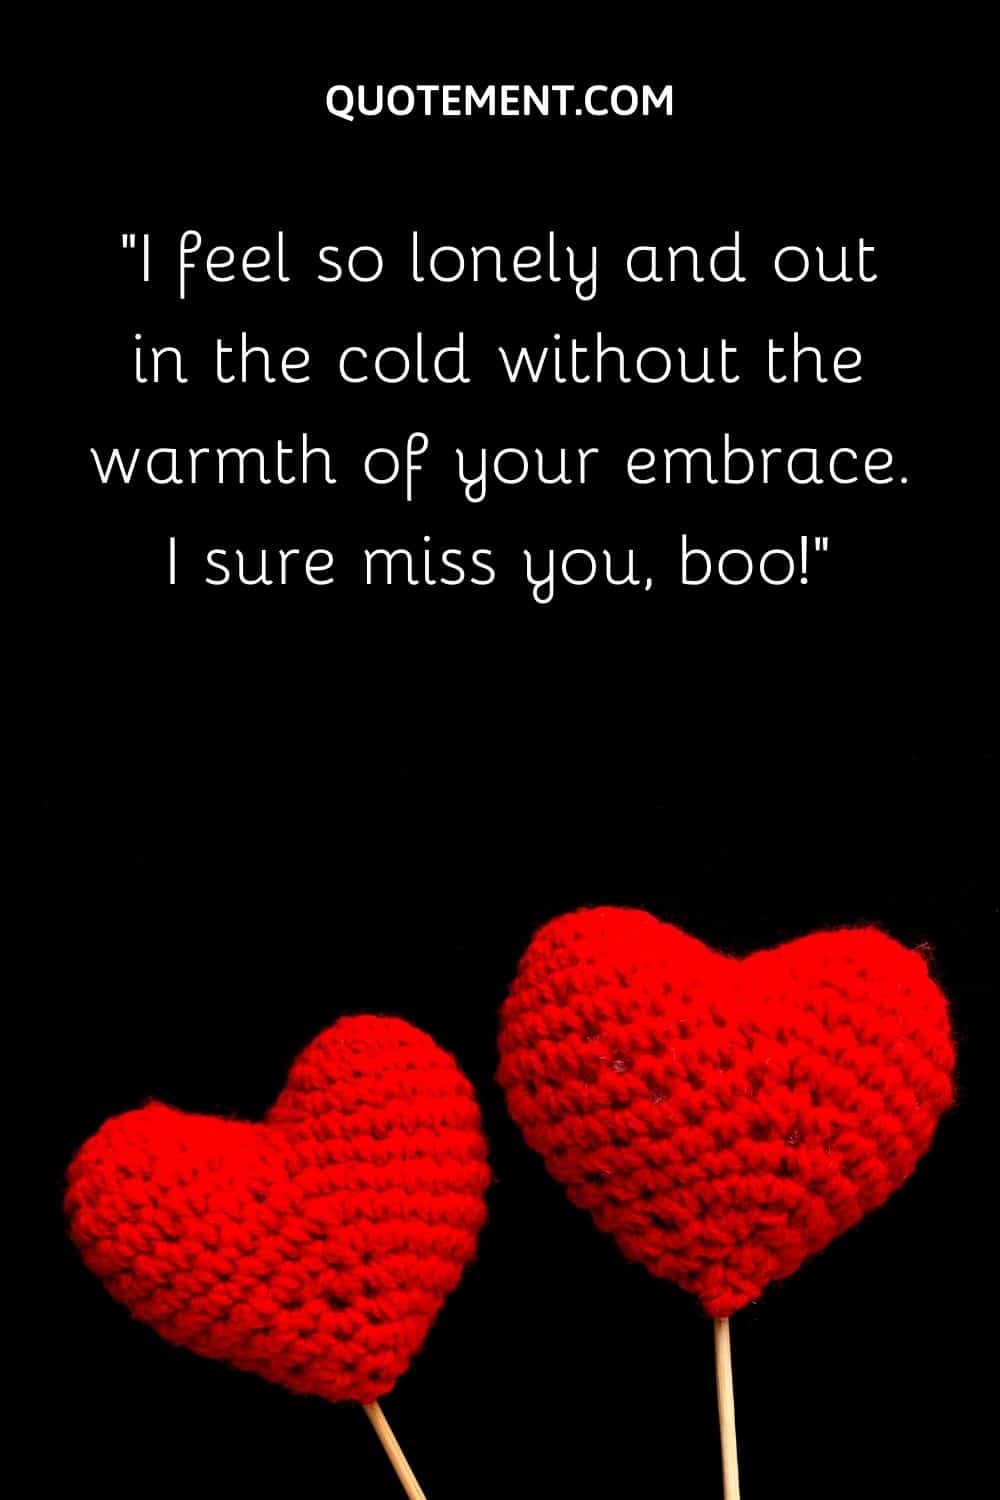 I feel so lonely and out in the cold without the warmth of your embrace. I sure miss you, boo!